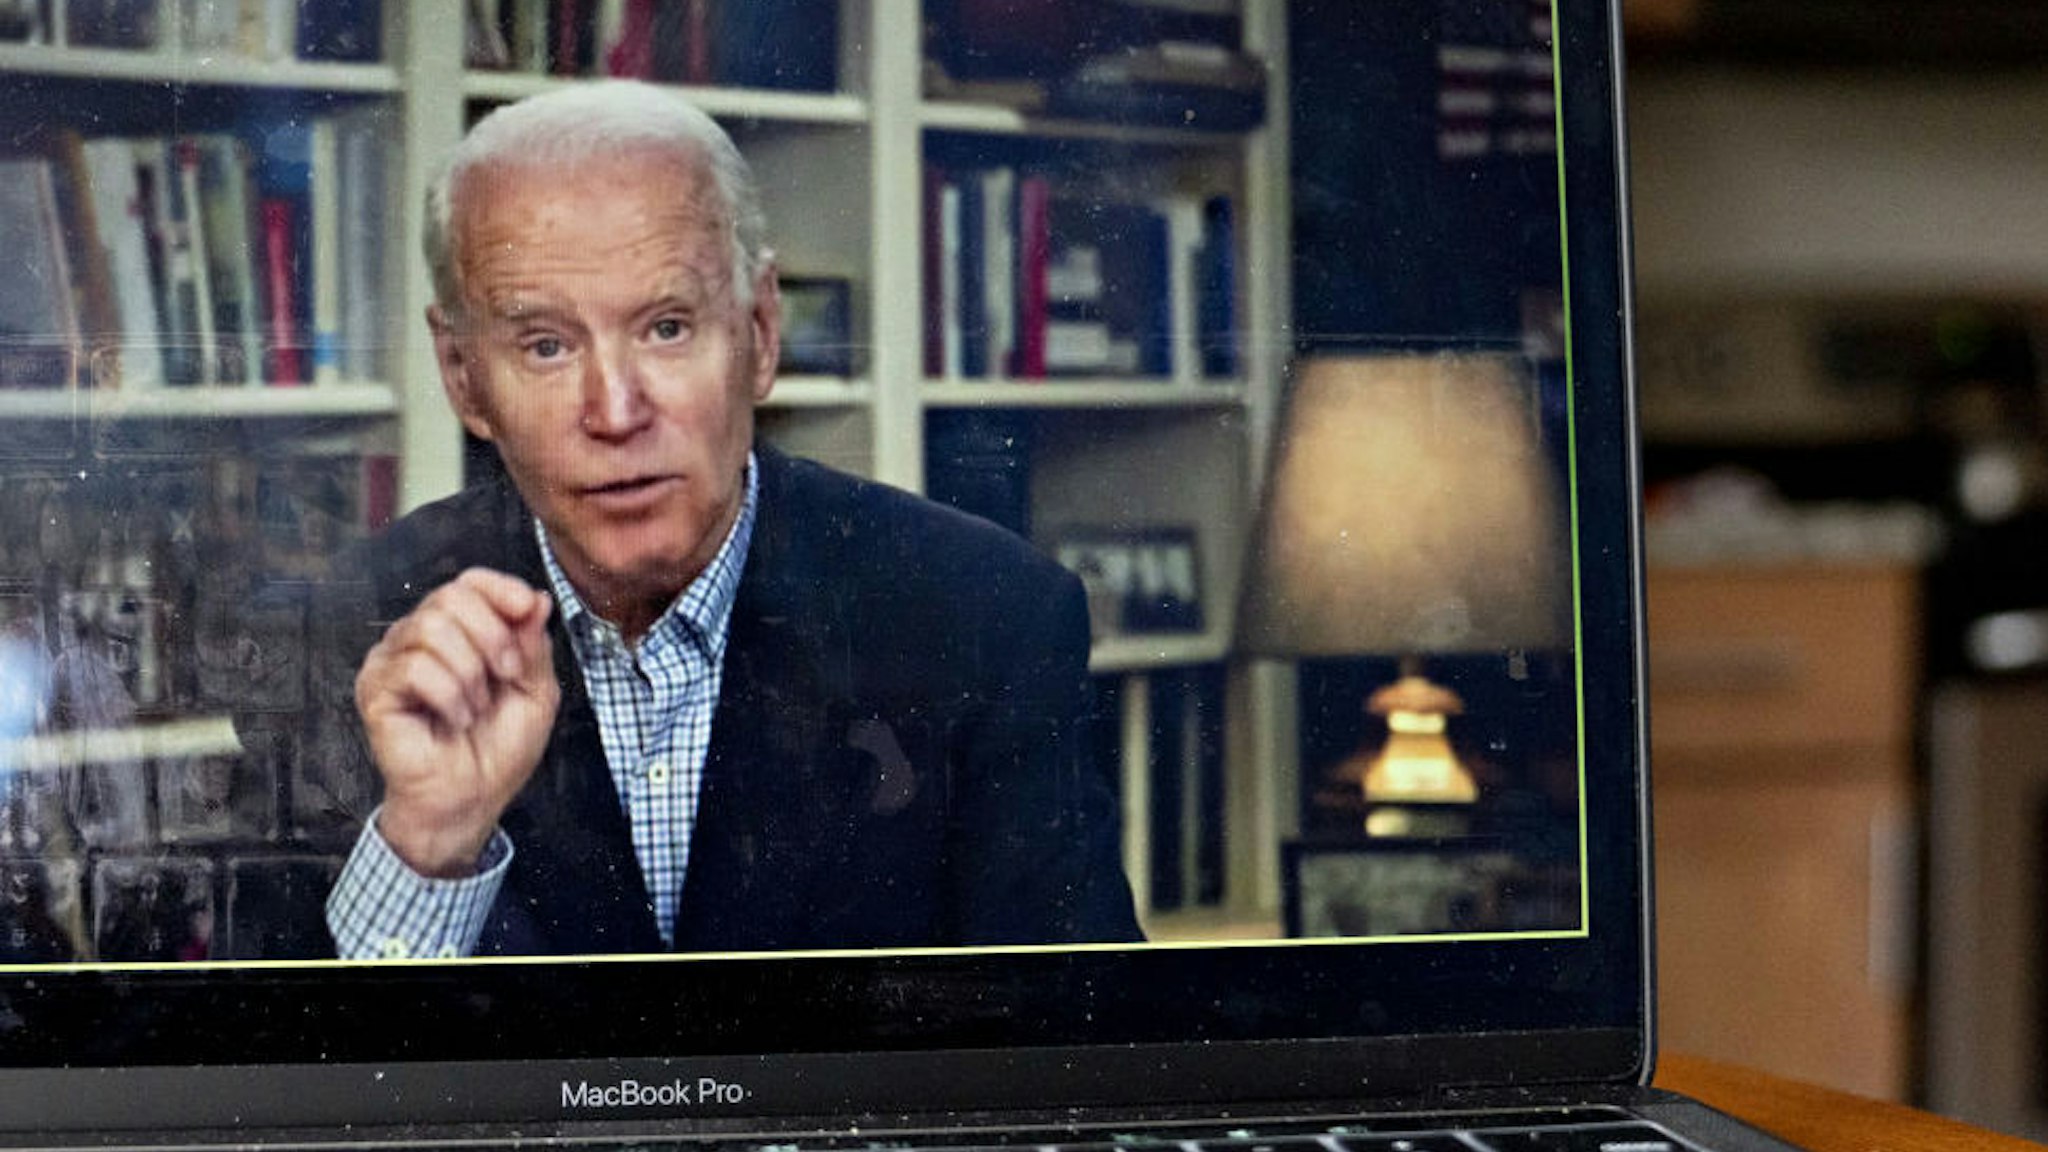 Former Vice President Joe Biden, 2020 Democratic presidential candidate, speaks during a virtual press briefing on a laptop computer in this arranged photograph in Arlington, Virginia, U.S., on Wednesday, March 25, 2020. During the livestreamed news conference today, Biden said he didn't see the need for another debate, which the Democratic National Committee had previously said would happen sometime in April. Photographer: Andrew Harrer/Bloomberg